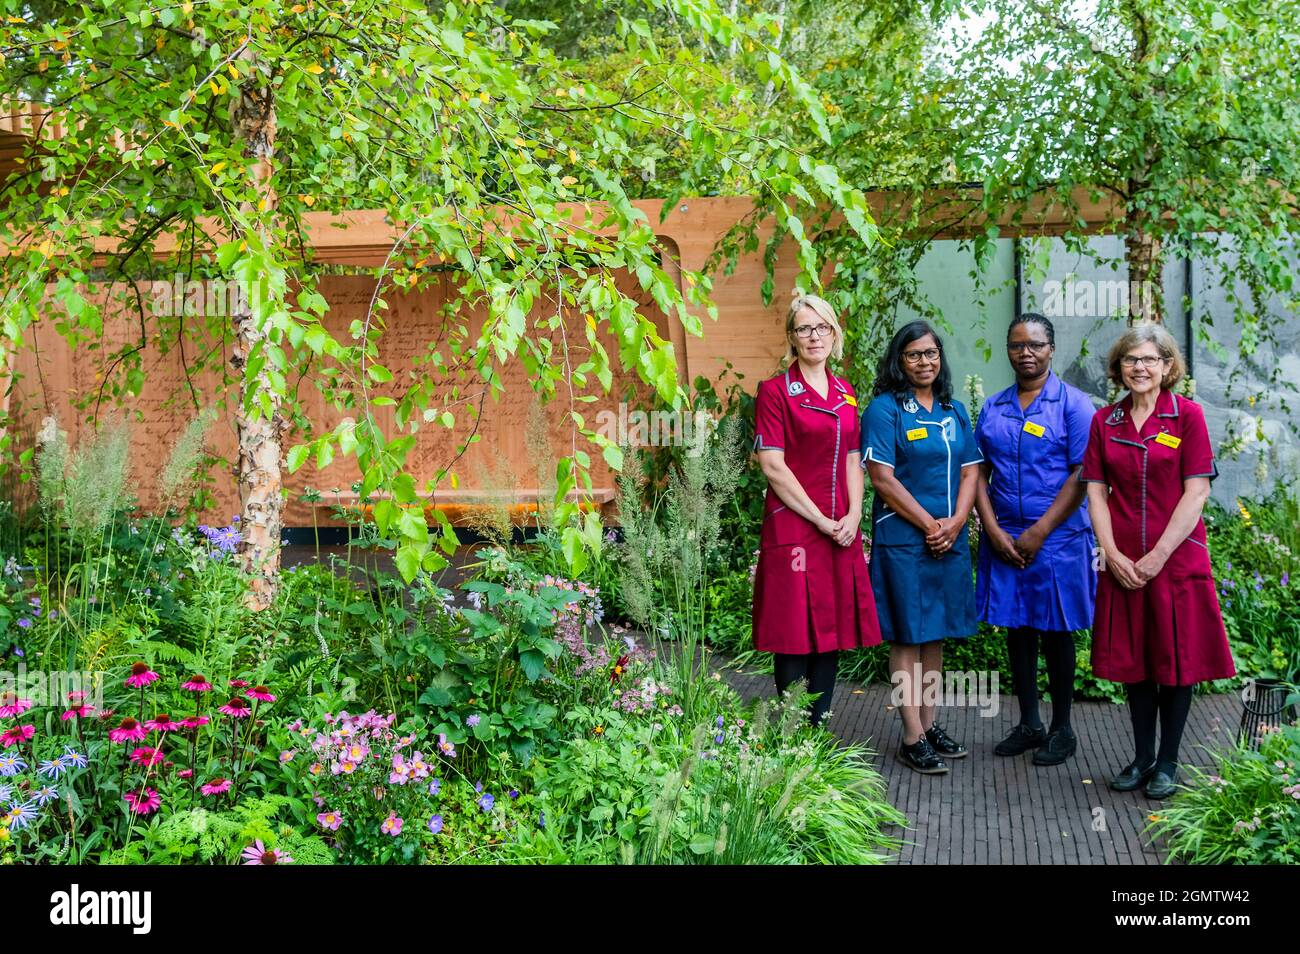 London, UK. 20th Sep, 2021. Four Nightingale nurses visit The Florence Nightingale Garden: A Celebration of Modern-Day Nursing Designed by Robert Myers - The 2021 Chelsea Flower Show. The show was cancelled last year due to the coronavirus lockdowns. Credit: Guy Bell/Alamy Live News Stock Photo